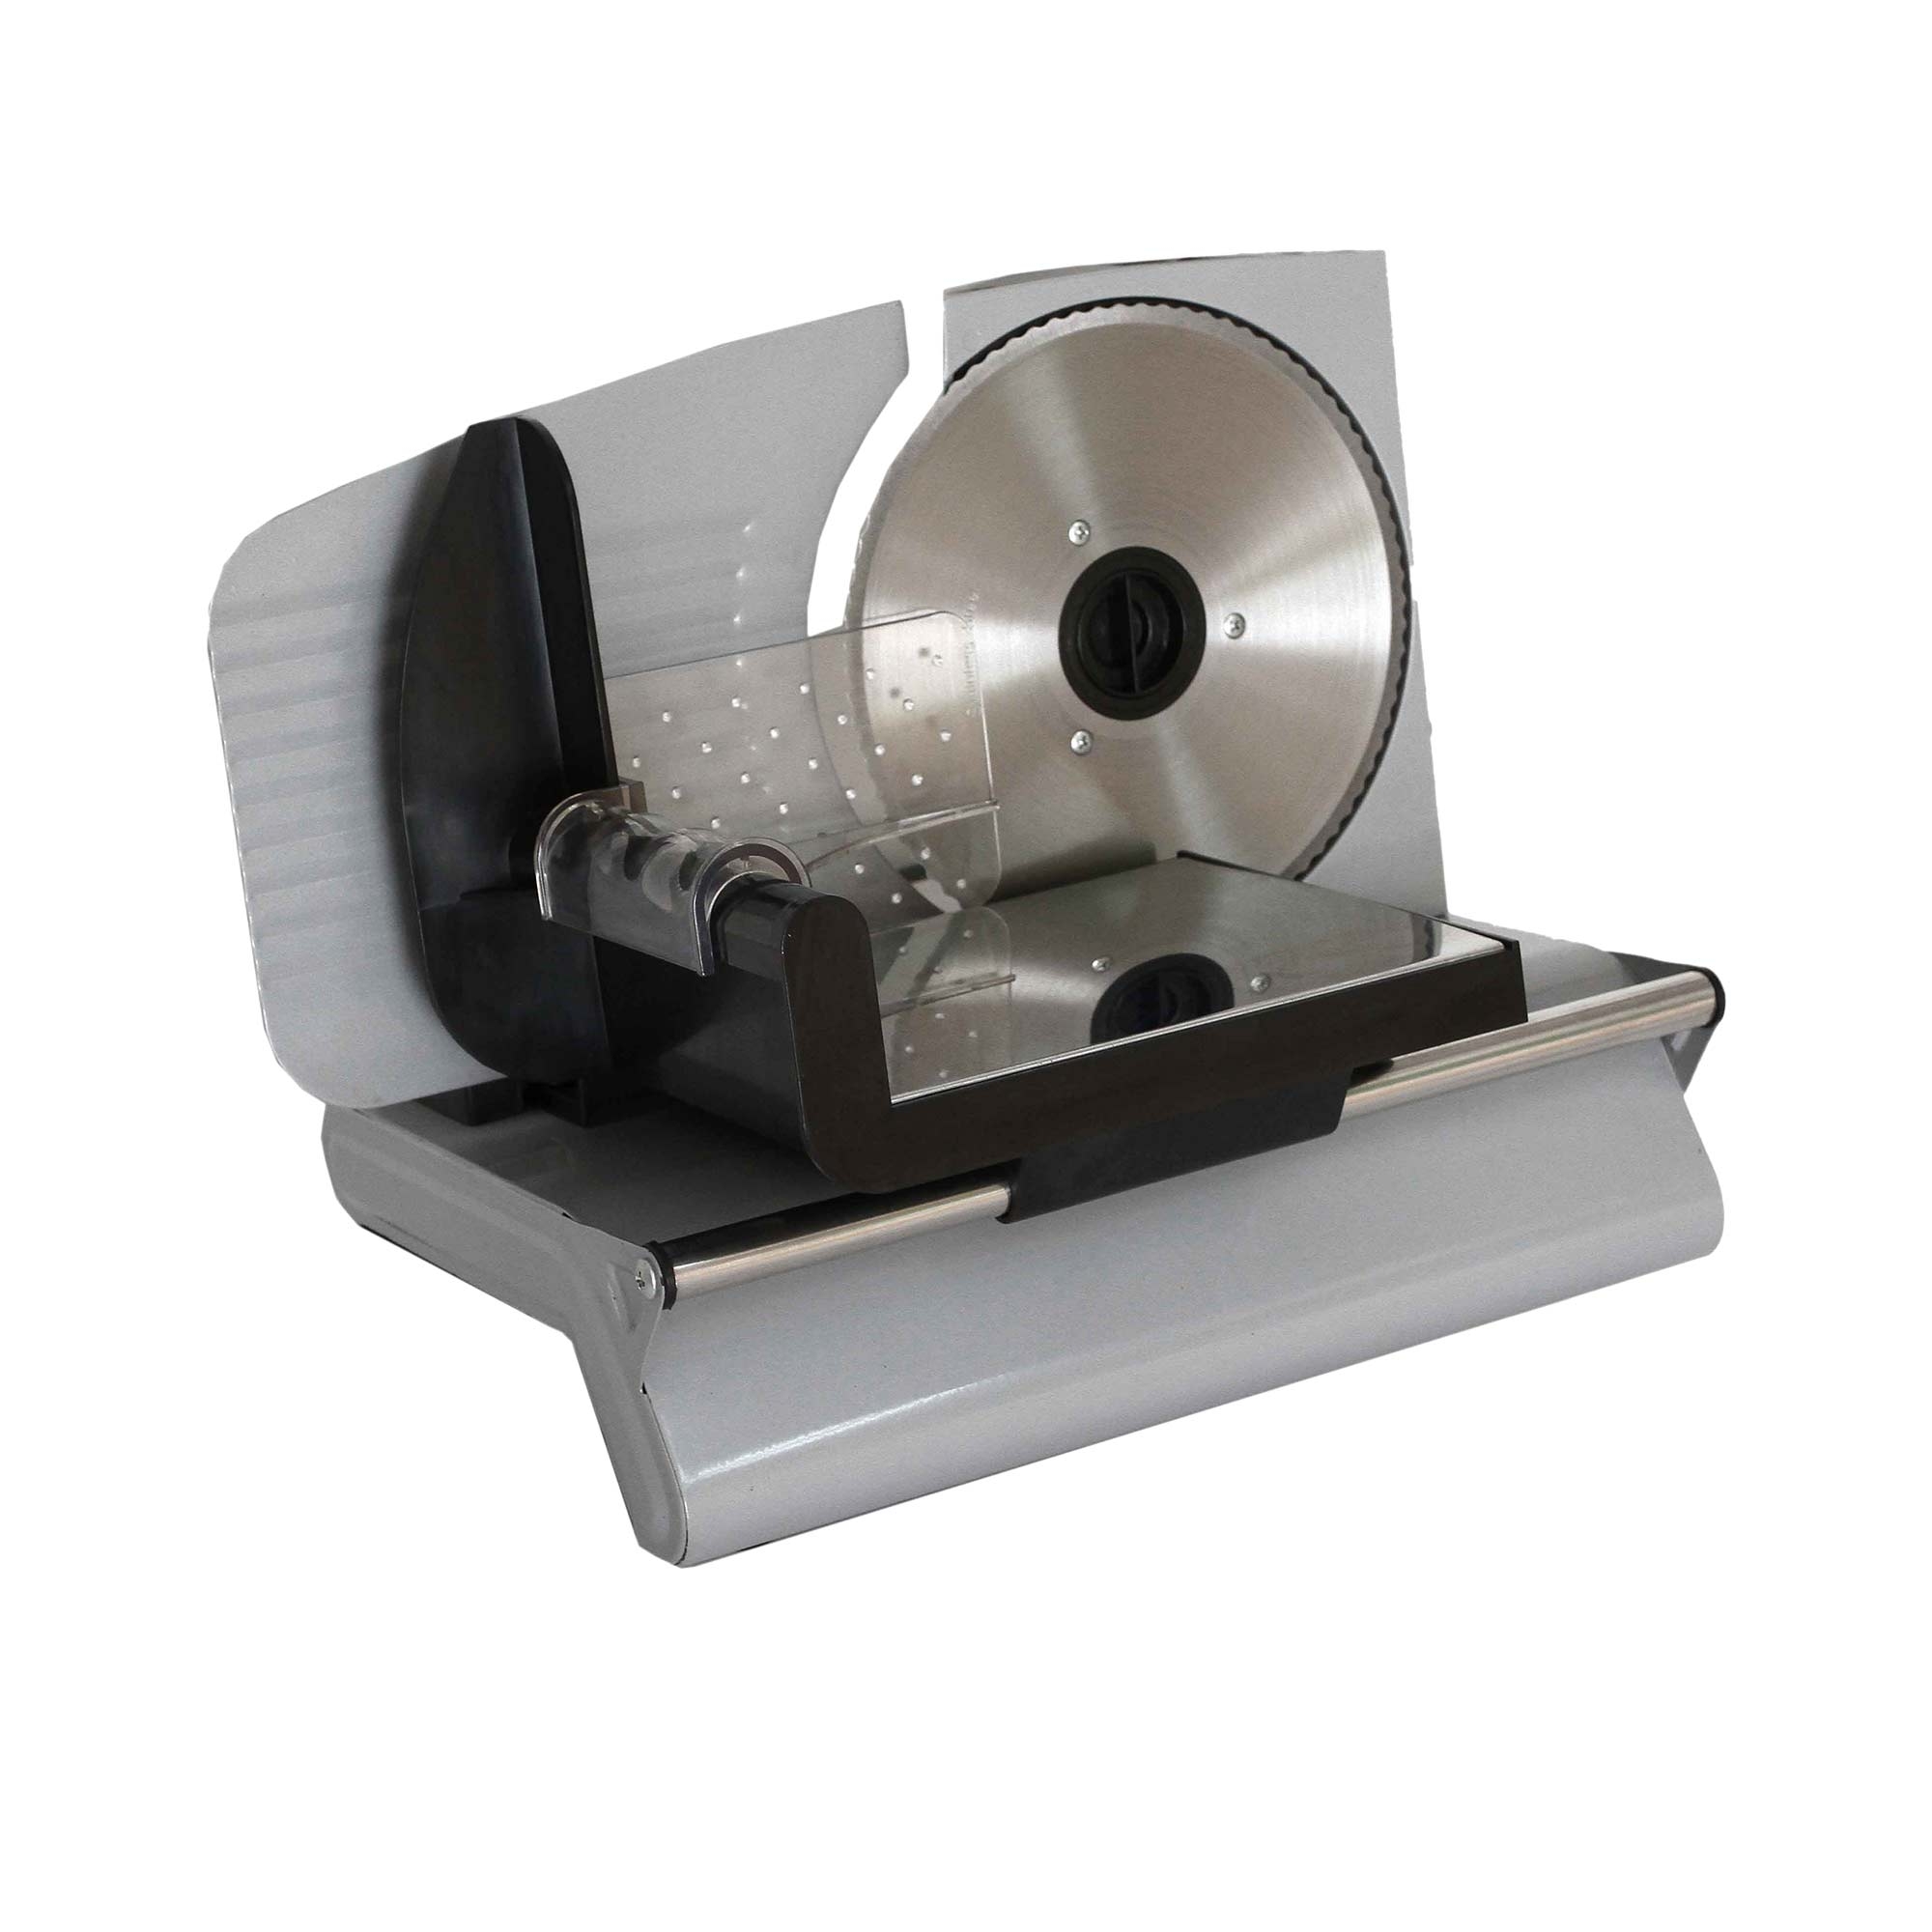 Healthy Choice Meat Slicer Silver Image 1